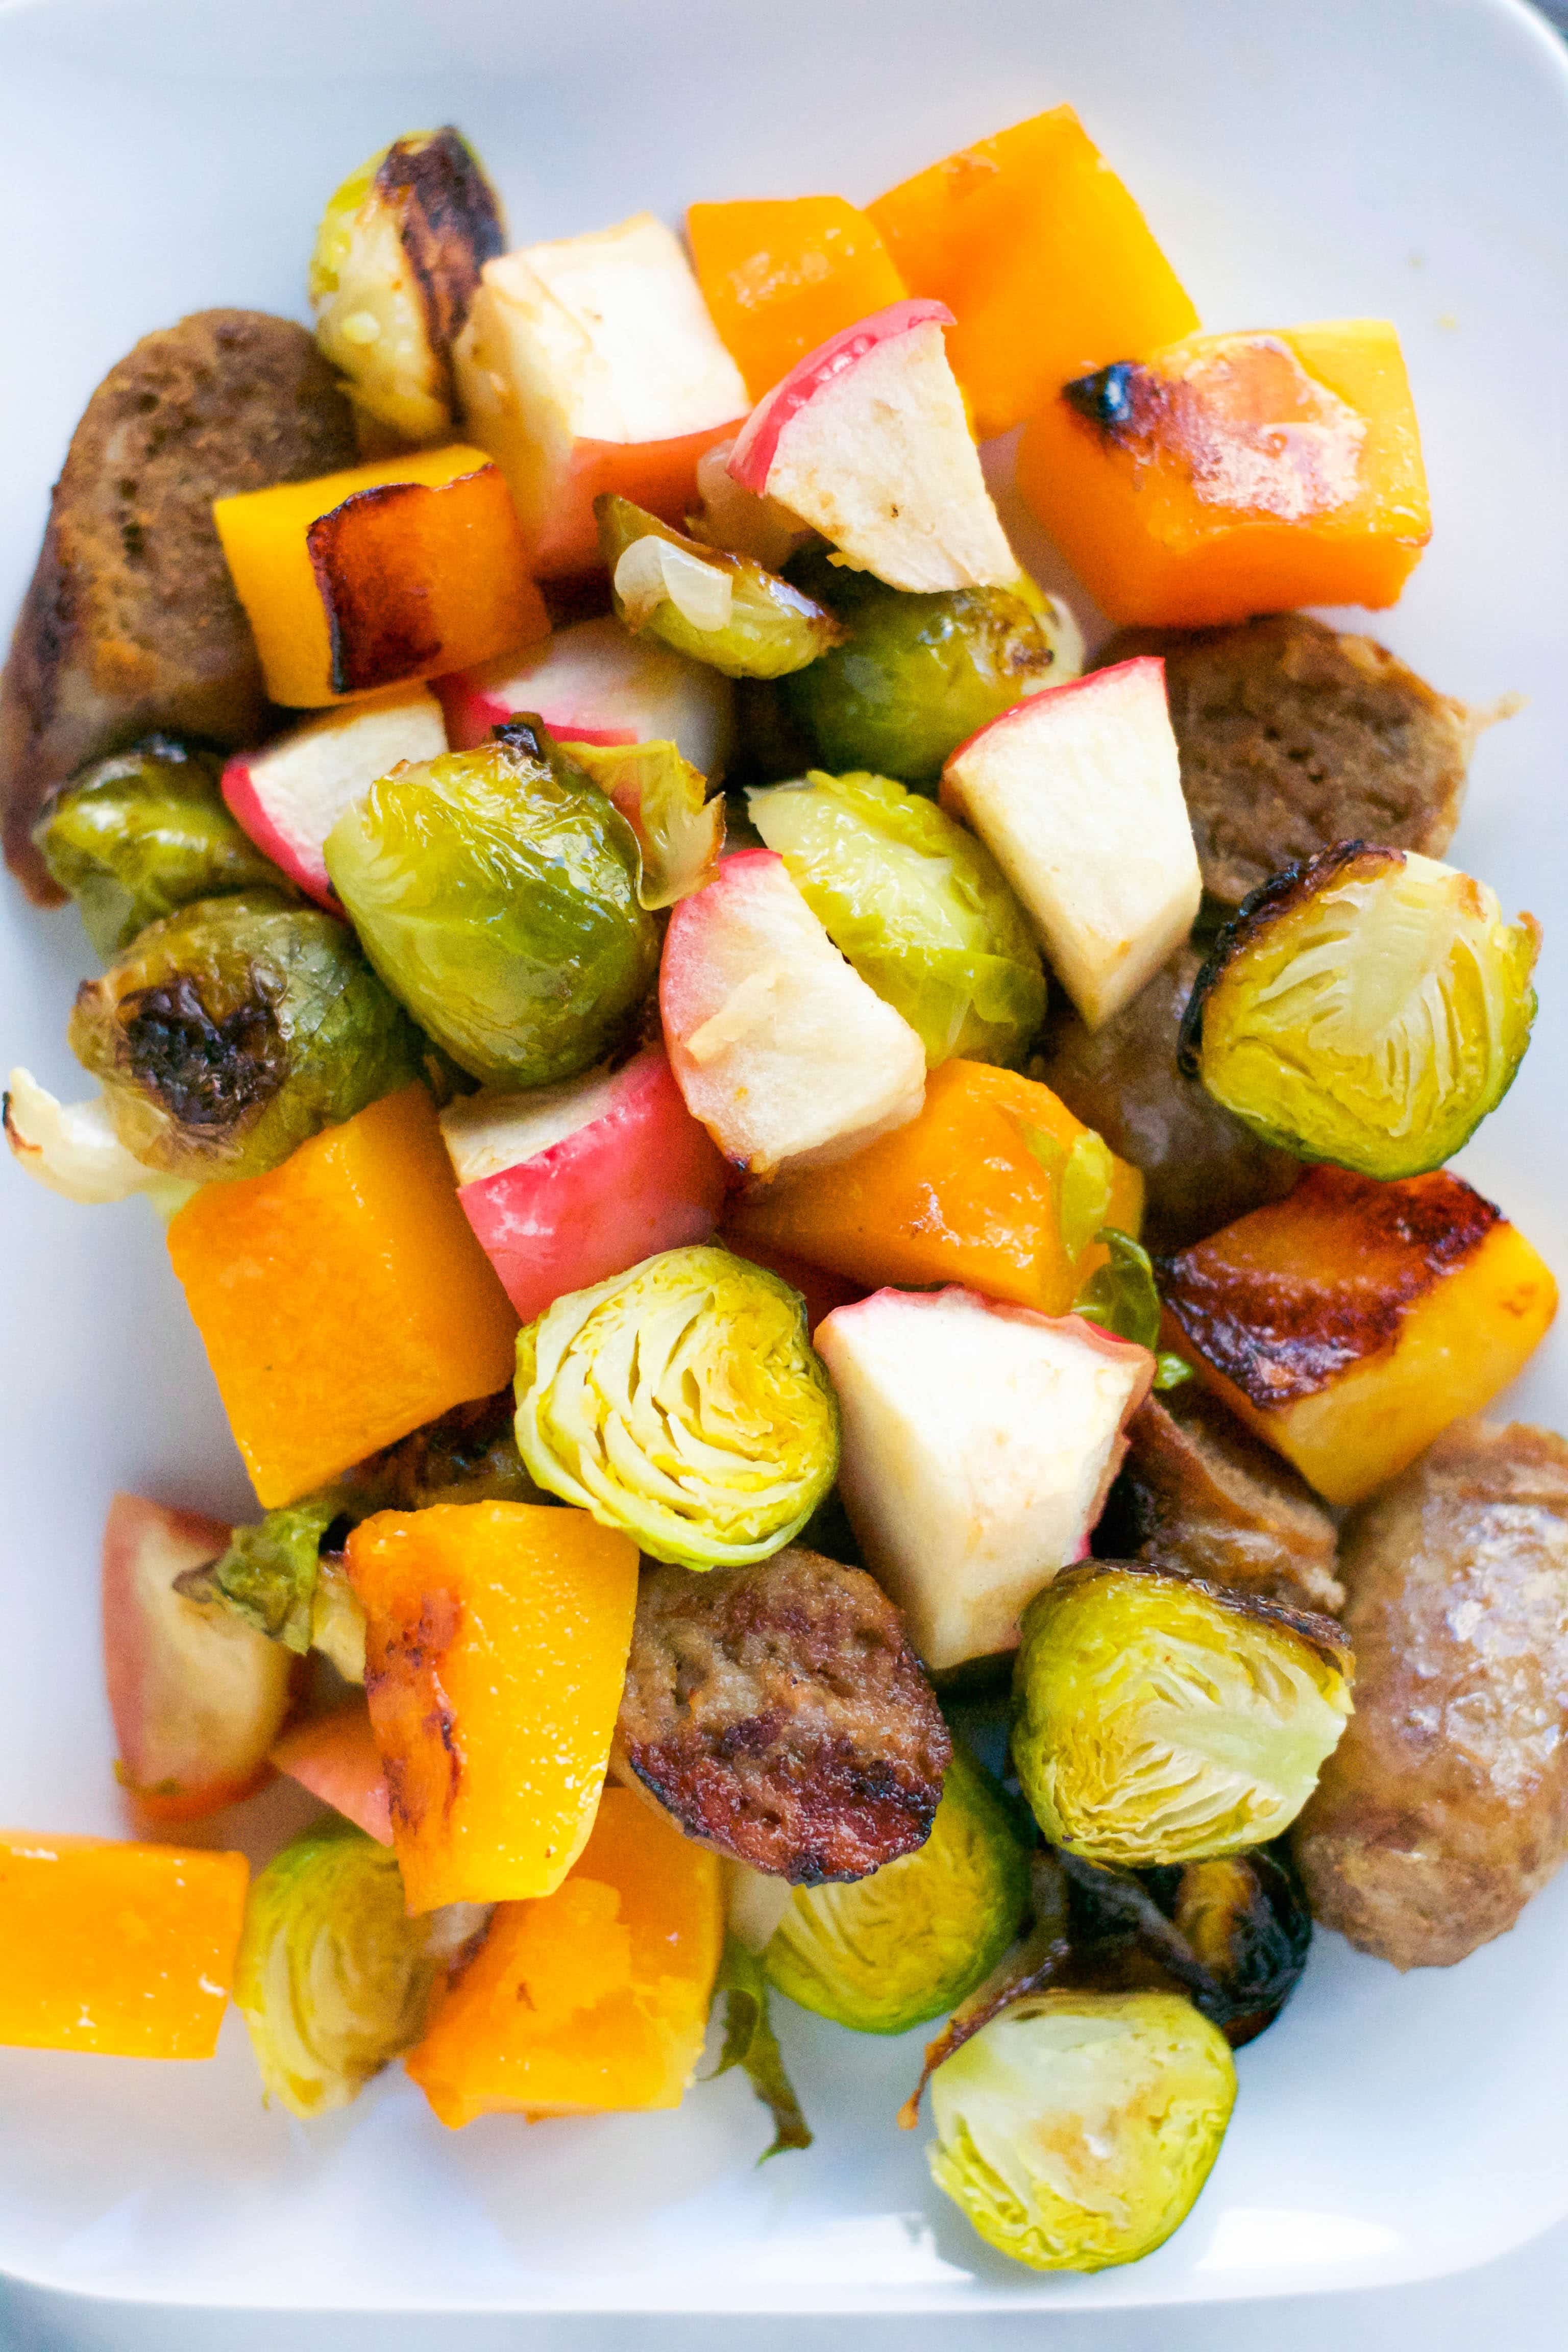 An overhead view of roasted brussels sprouts, apples, chicken sausage slices, and butternut squash pieces. 